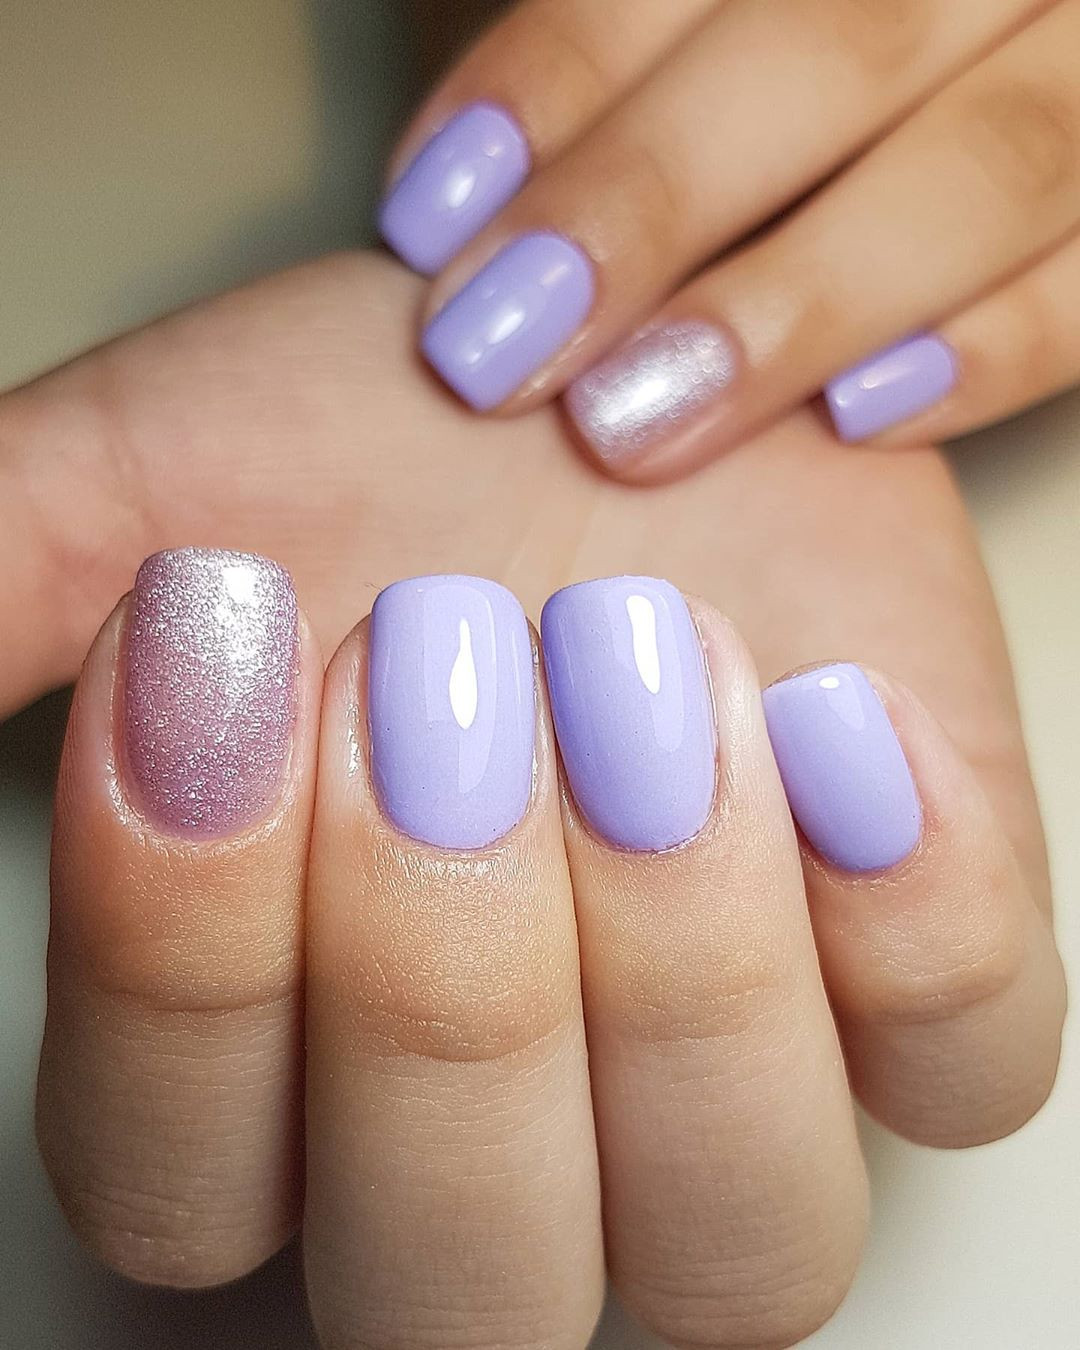 45 Best Summer Nail Colors for 2020,best summer nail colors 2020,#summernail #nails